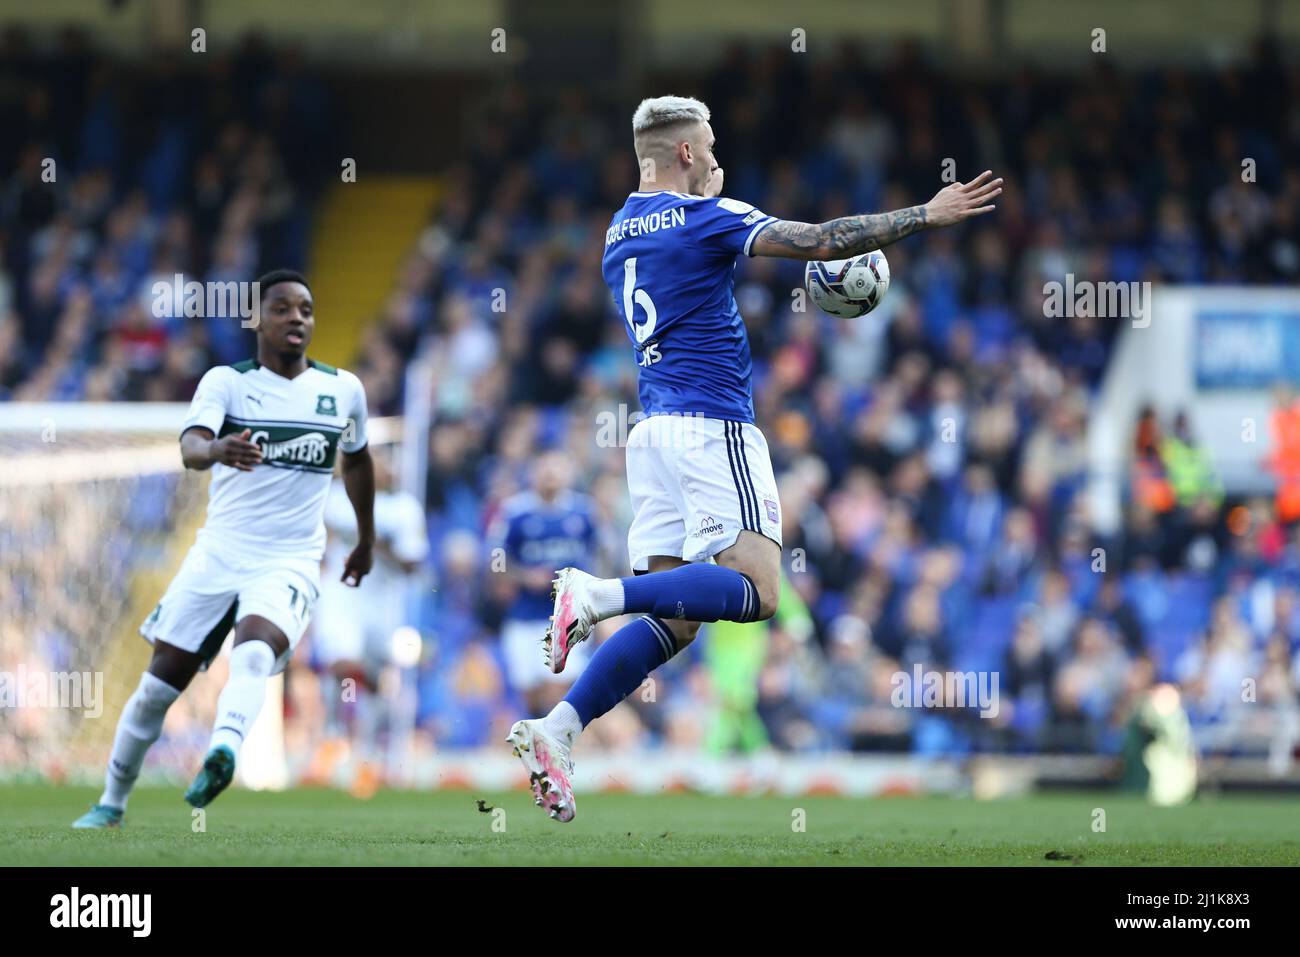 Ipswich, UK. 26th Mar, 2022. Luke Woolfenden #6 of Ipswich Town controls the ball in Ipswich, United Kingdom on 3/26/2022. (Photo by Arron Gent/News Images/Sipa USA) Credit: Sipa USA/Alamy Live News Stock Photo